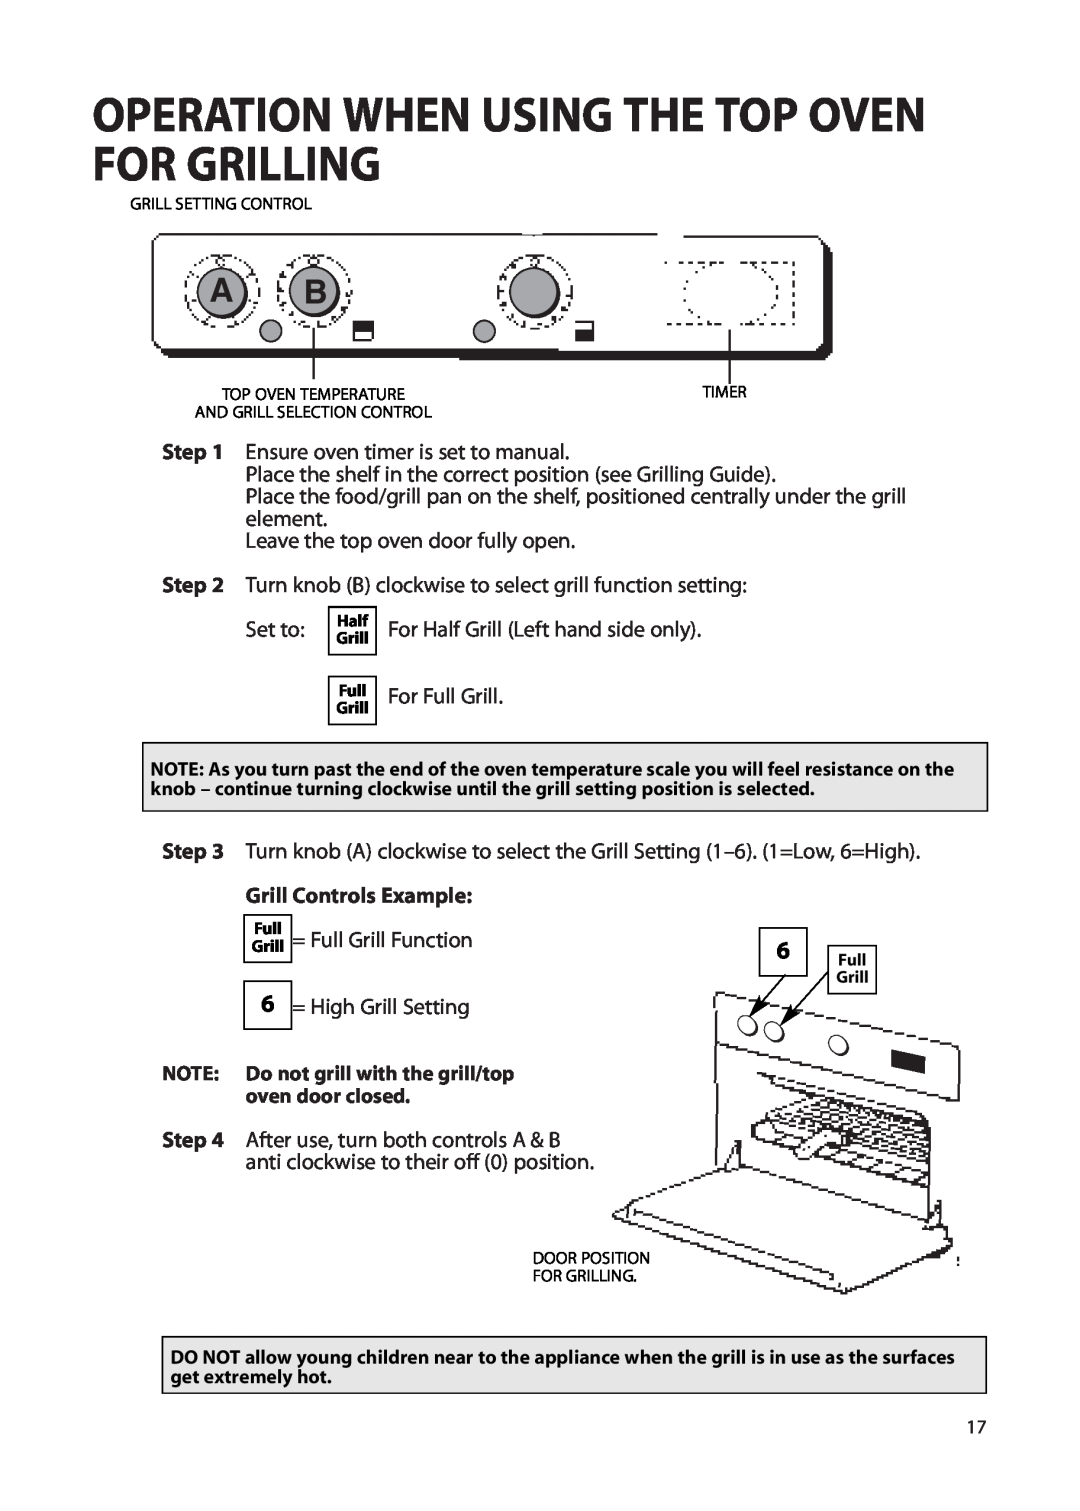 Creda Double Oven manual Operation When Using The Top Oven For Grilling, Grill Controls Example 